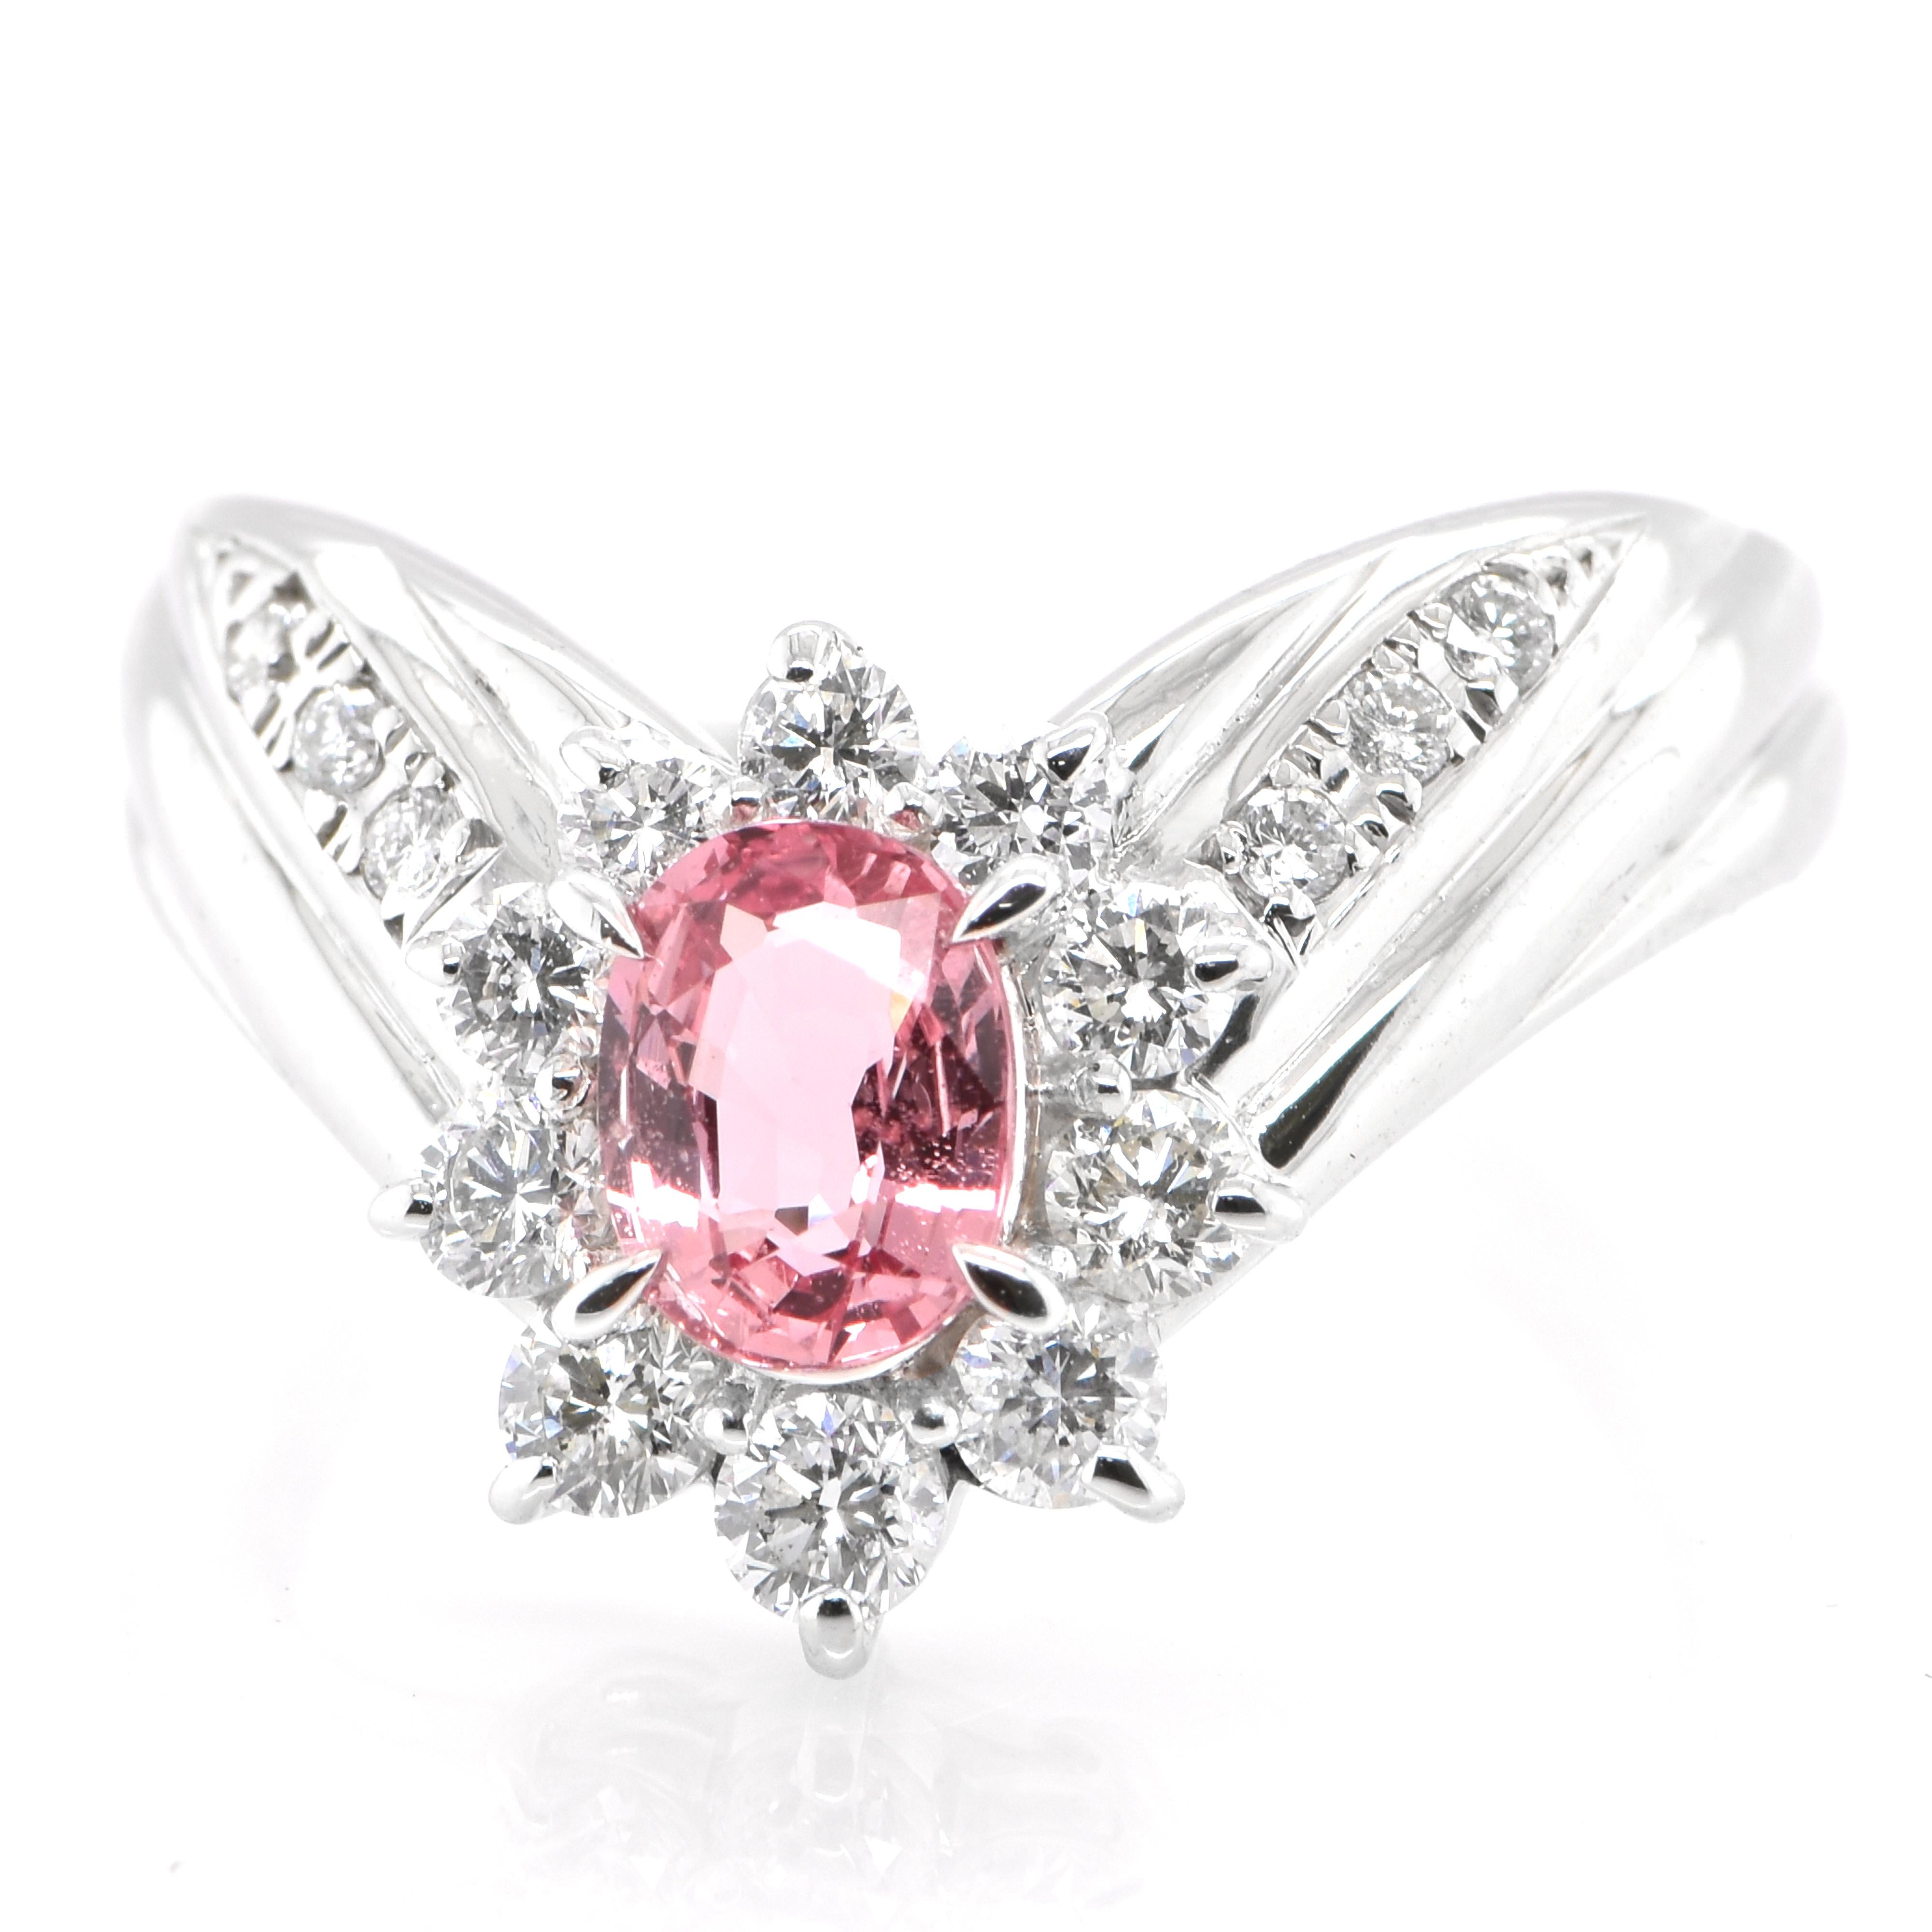 A beautiful ring featuring a 0.817 Carat, Natural Padparadscha Sapphire and 0.62 Carats of Diamond Accents set in Platinum. Sapphires have extraordinary durability - they excel in hardness as well as toughness and durability making them very popular